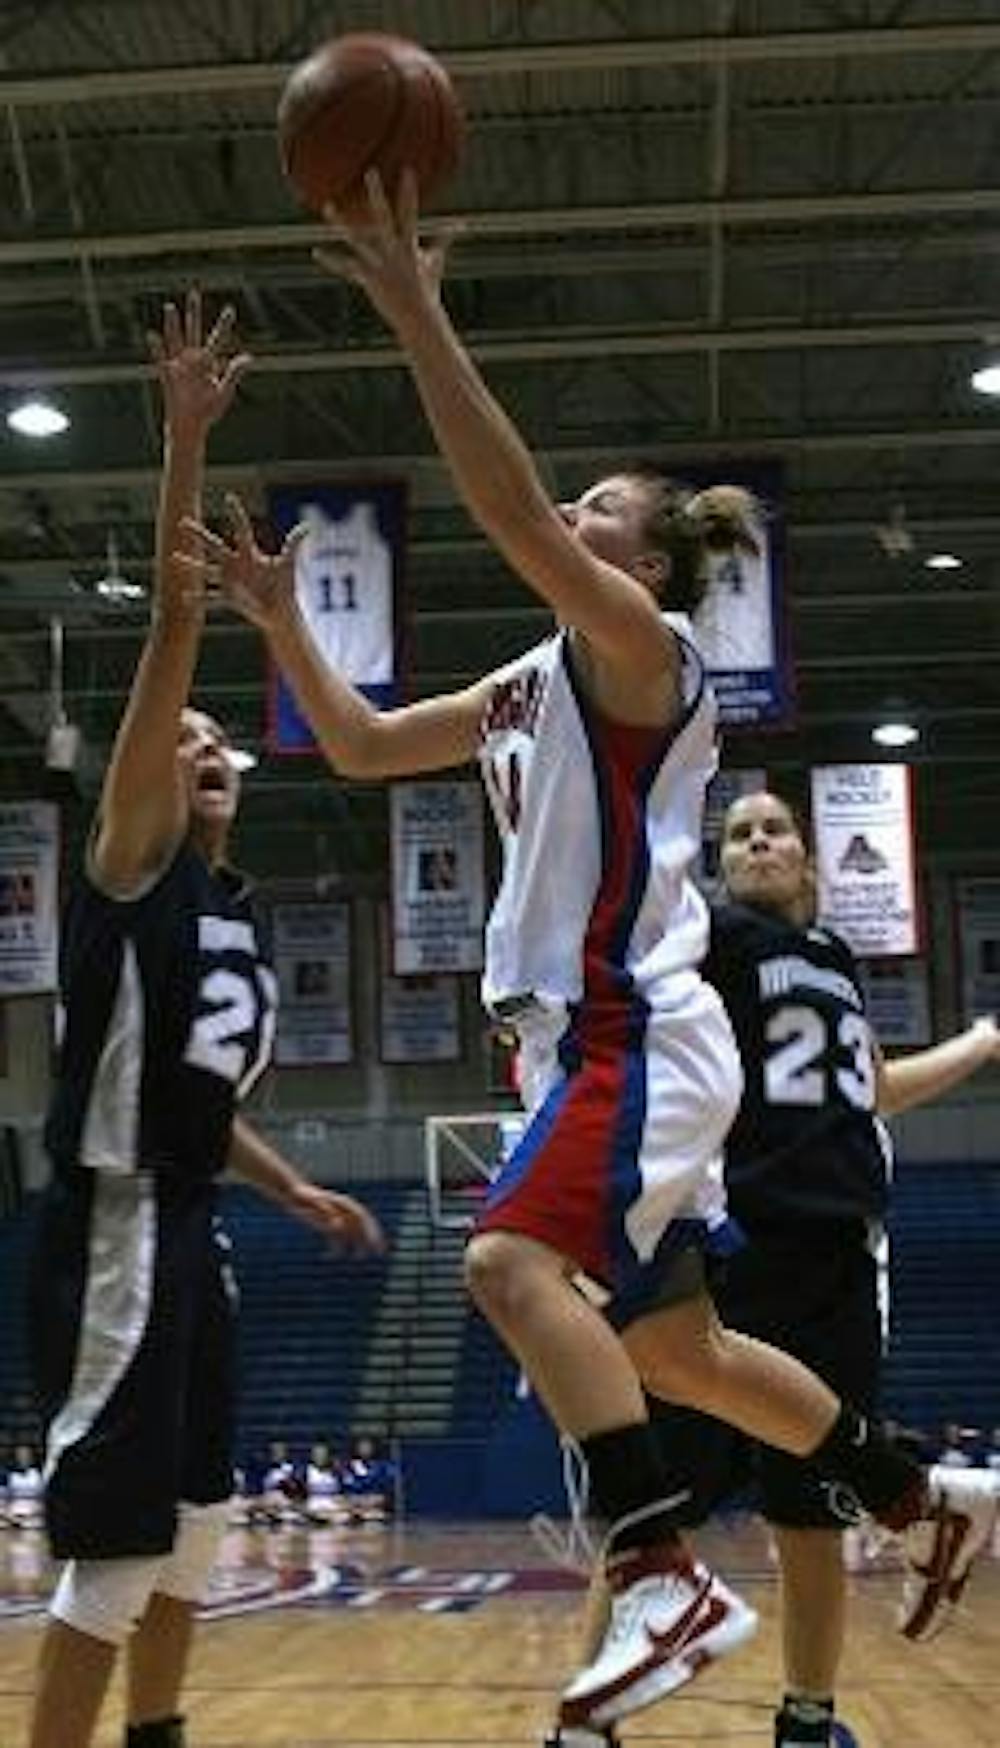 AERIAL ACROBATICS - Senior guard Liz Hayes attempts a shot in the thick of Monmouth University opponents.